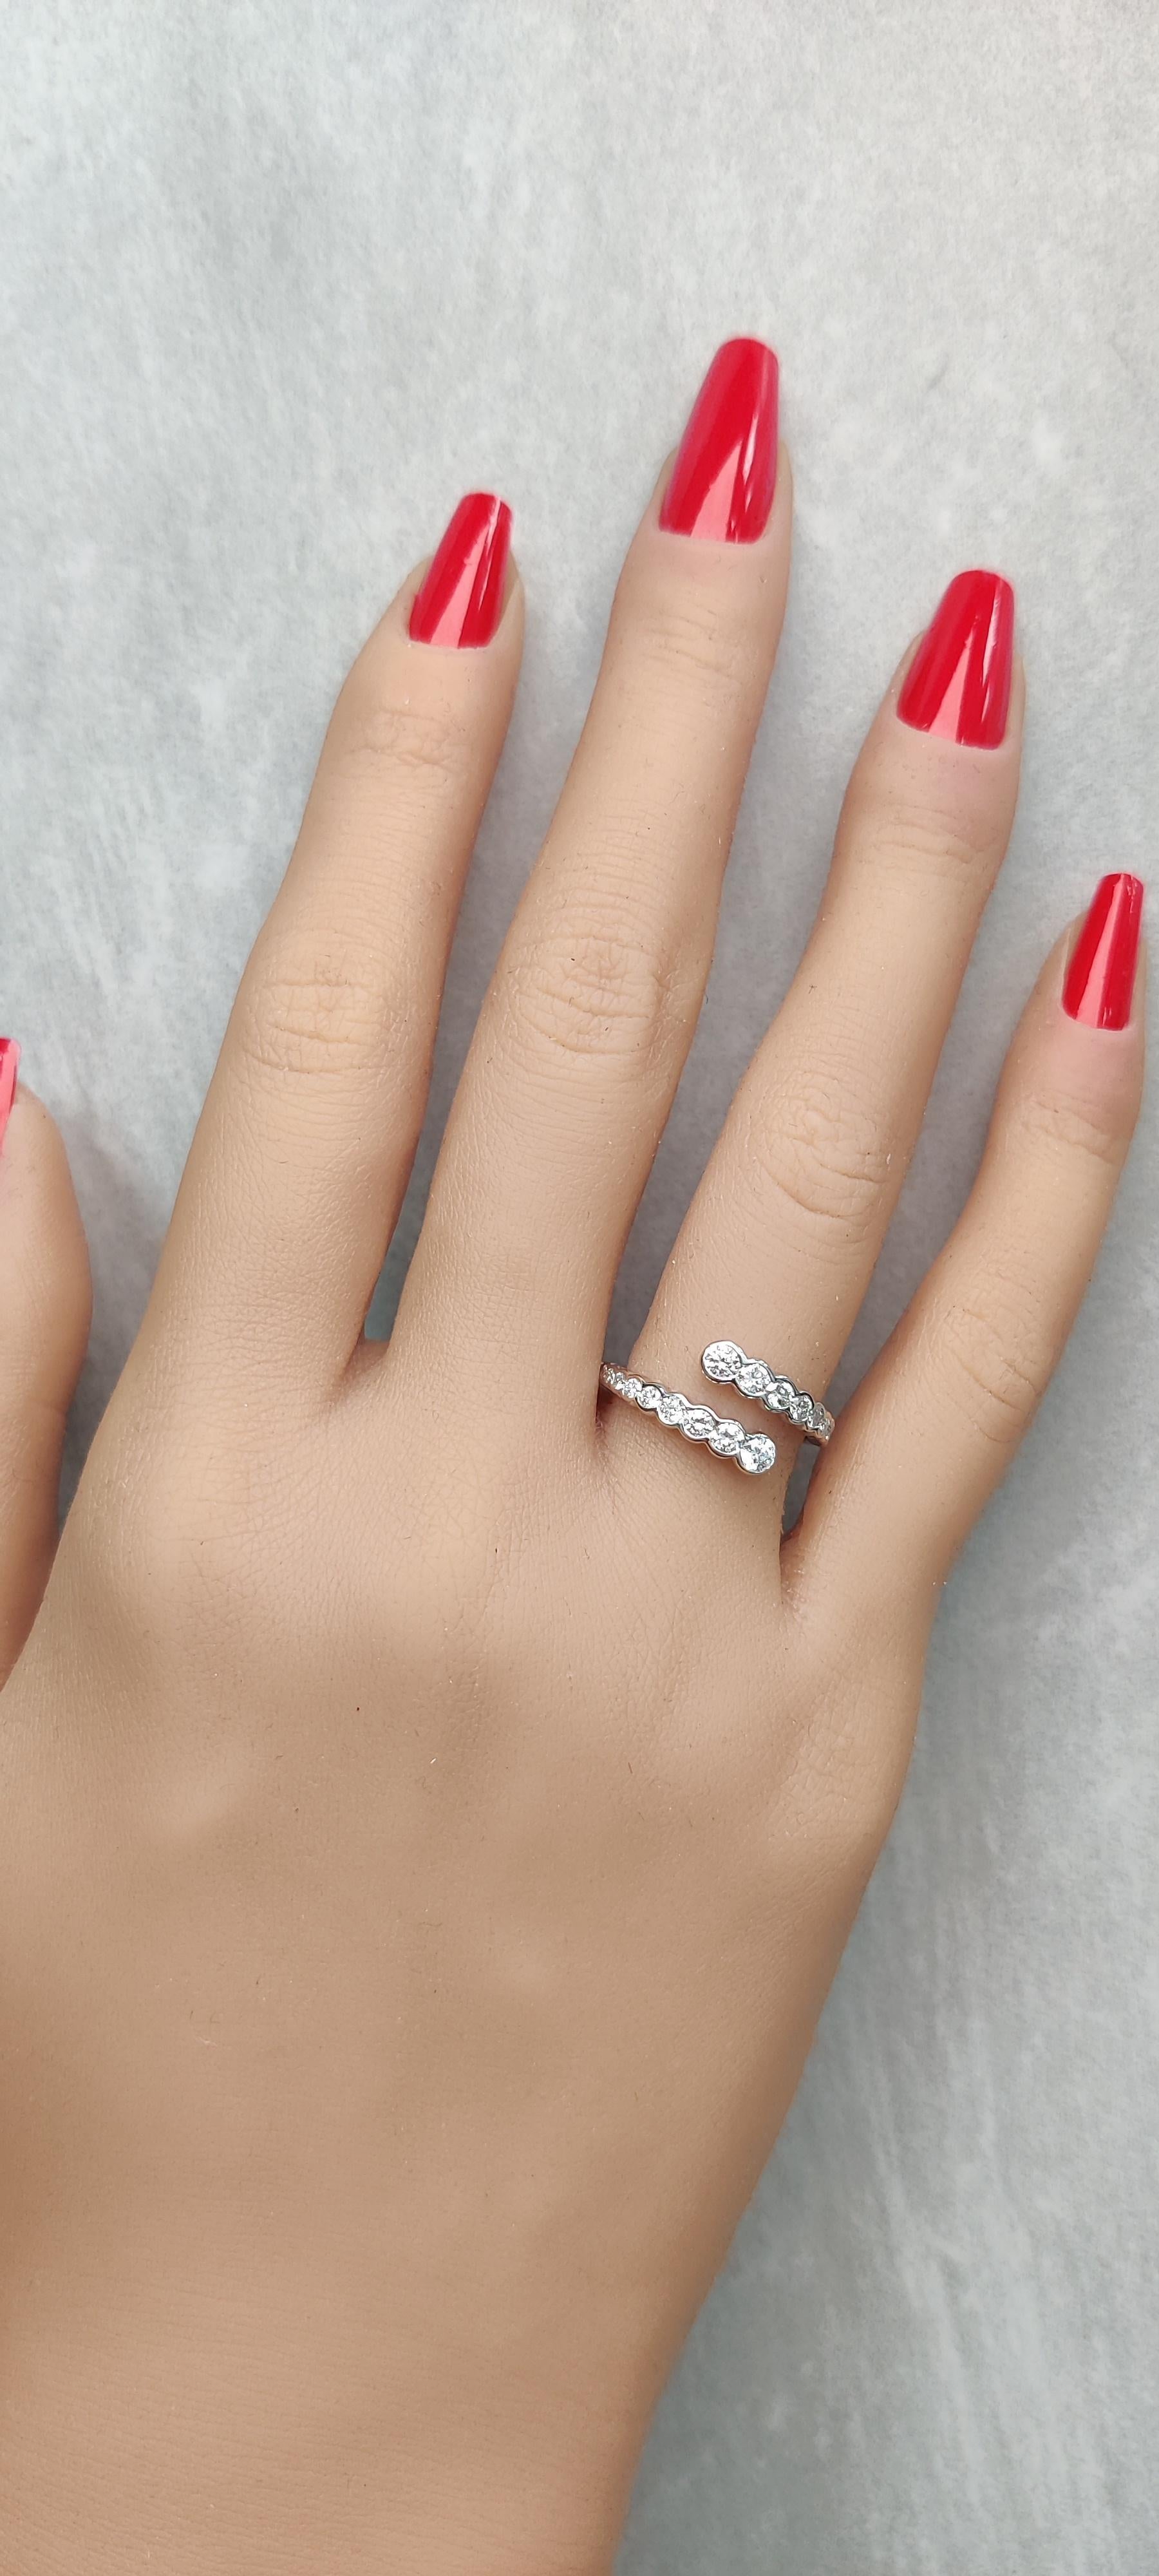 RareGemWorld's classic diamond band. Mounted in a beautiful 18K White Gold setting with natural round white diamond melee. This band is guaranteed to impress and enhance your personal collection!

Total Weight: 0.78cts

Natural Round White Diamonds